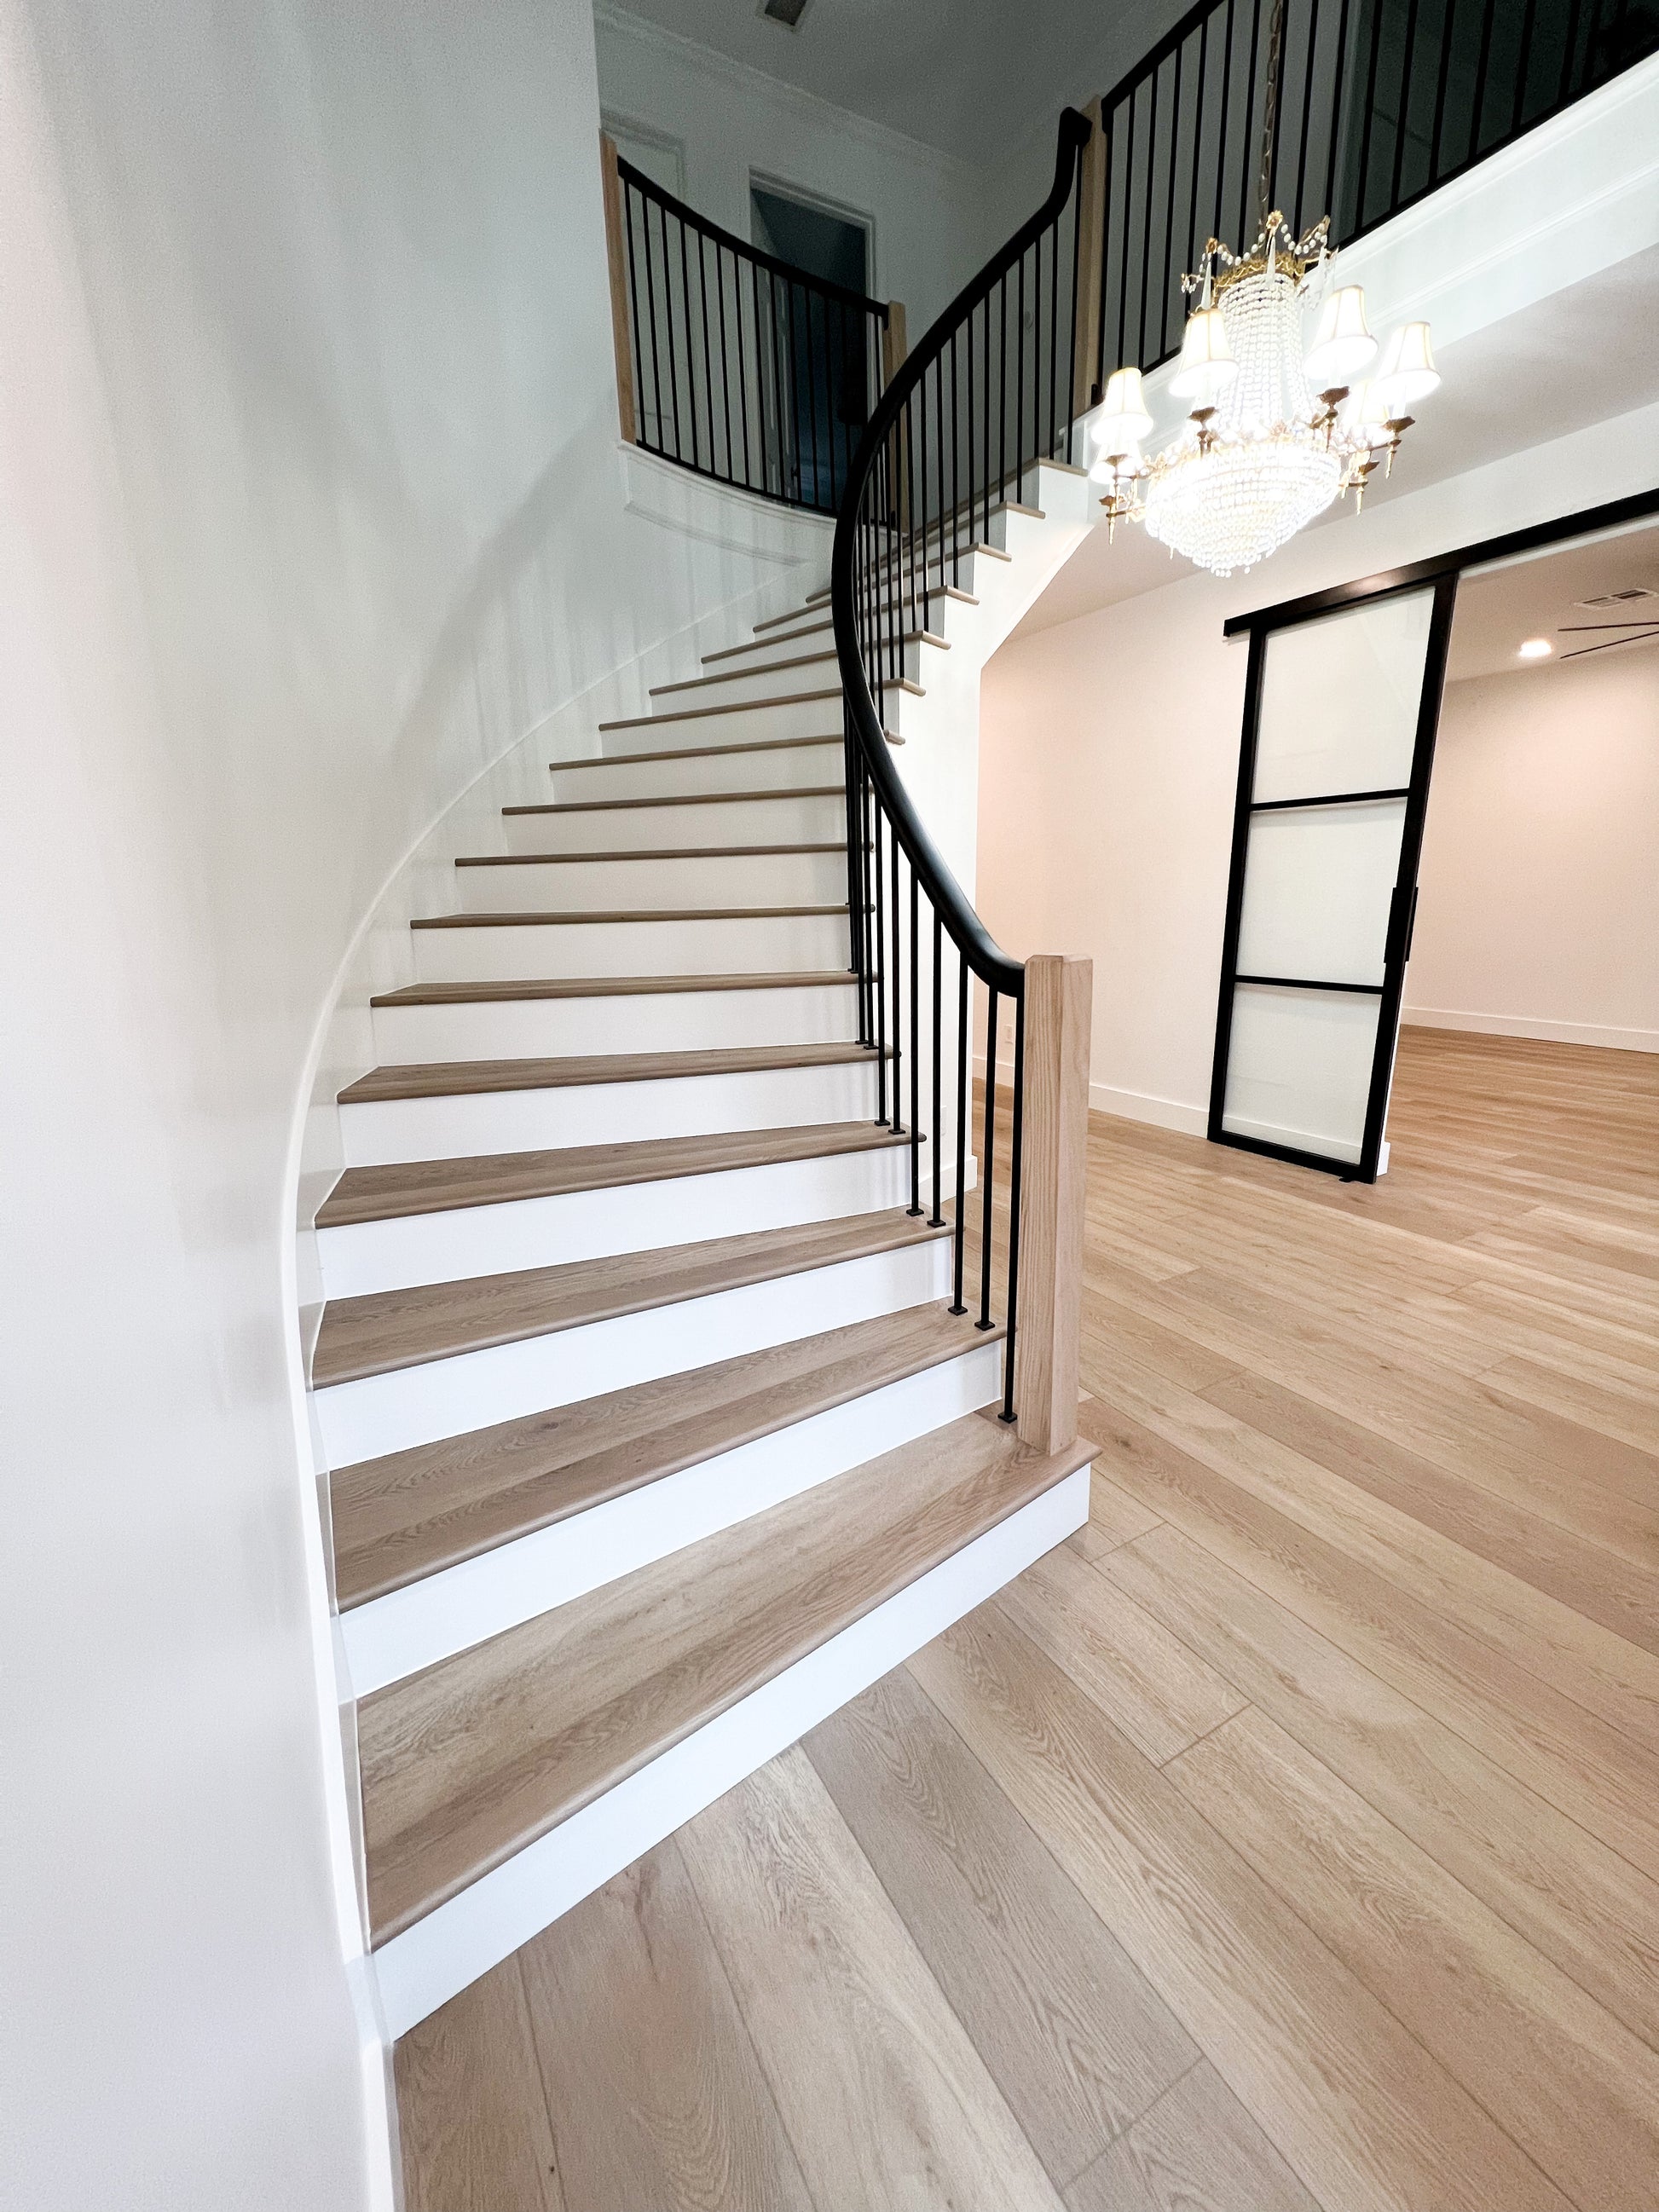 Photo of Rustic Becki Owens Elite Stoneform Flooring set by a staircase